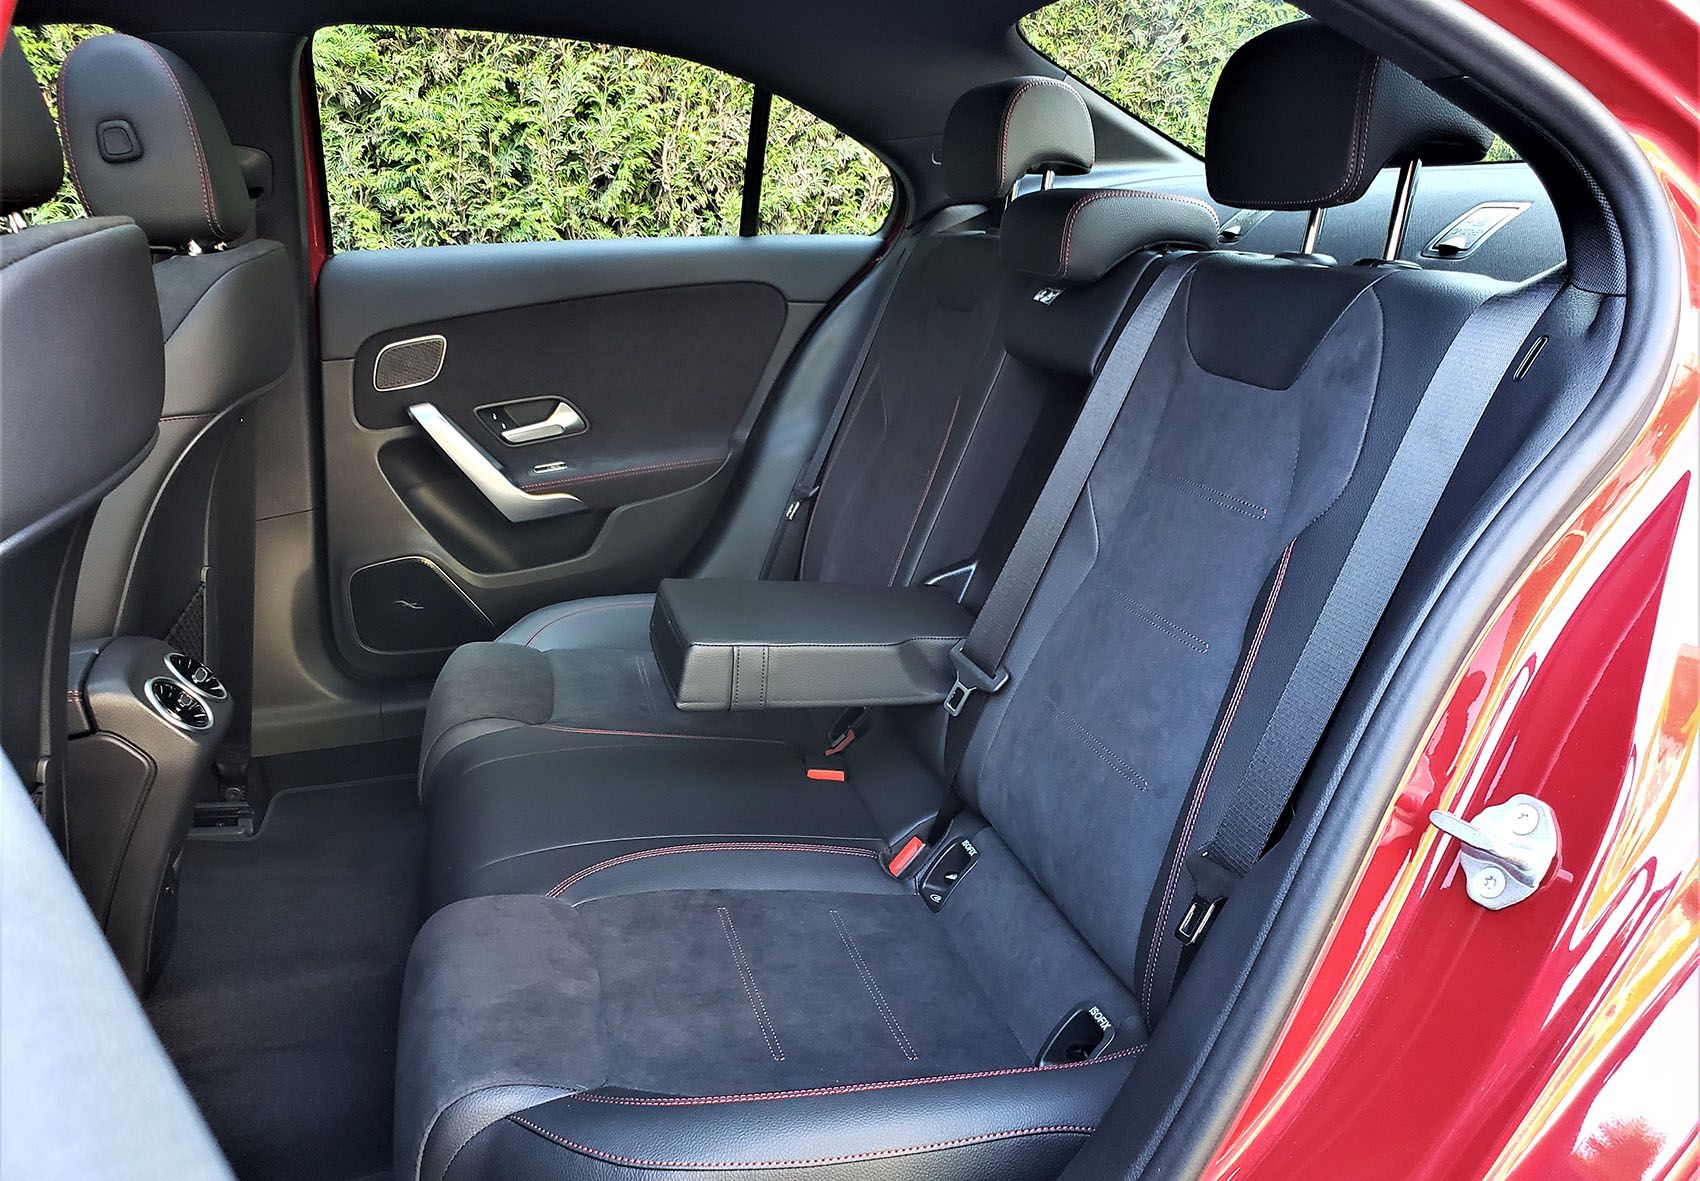 Rear seat roominess is identical from Sedan (shown) to Hatch, and is quite roomy for the class.